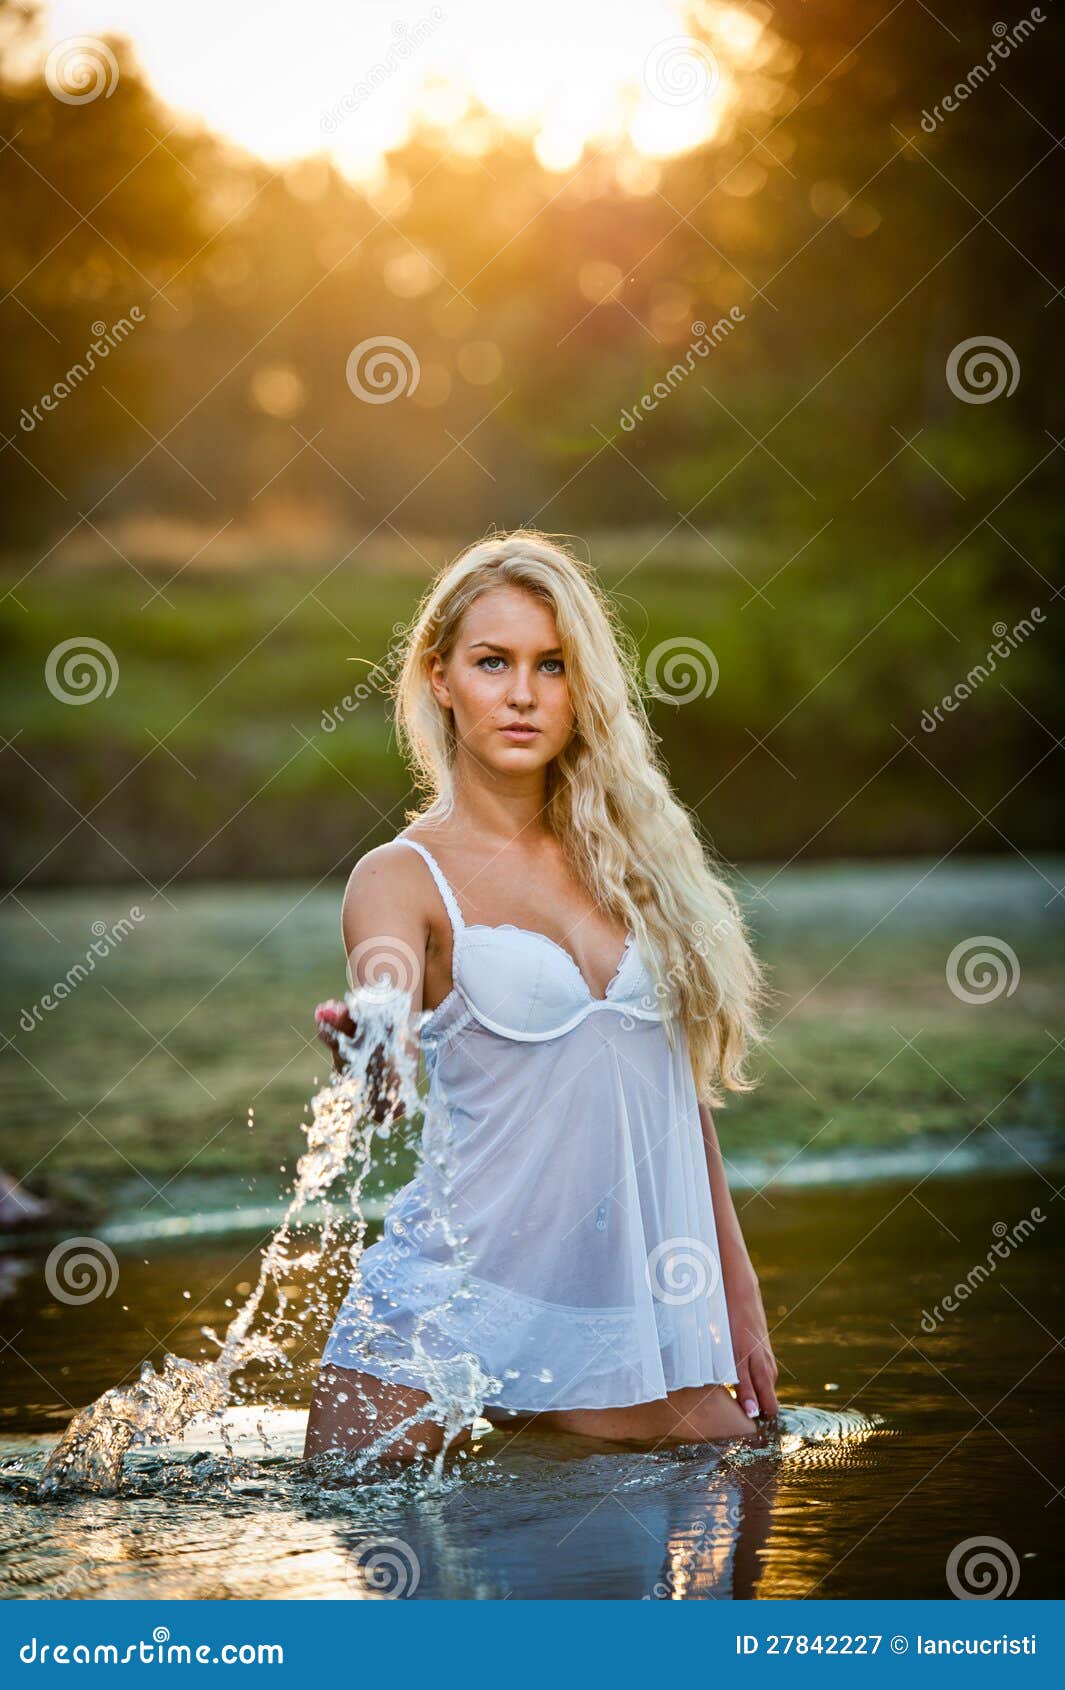 blonde woman in lingerie a river